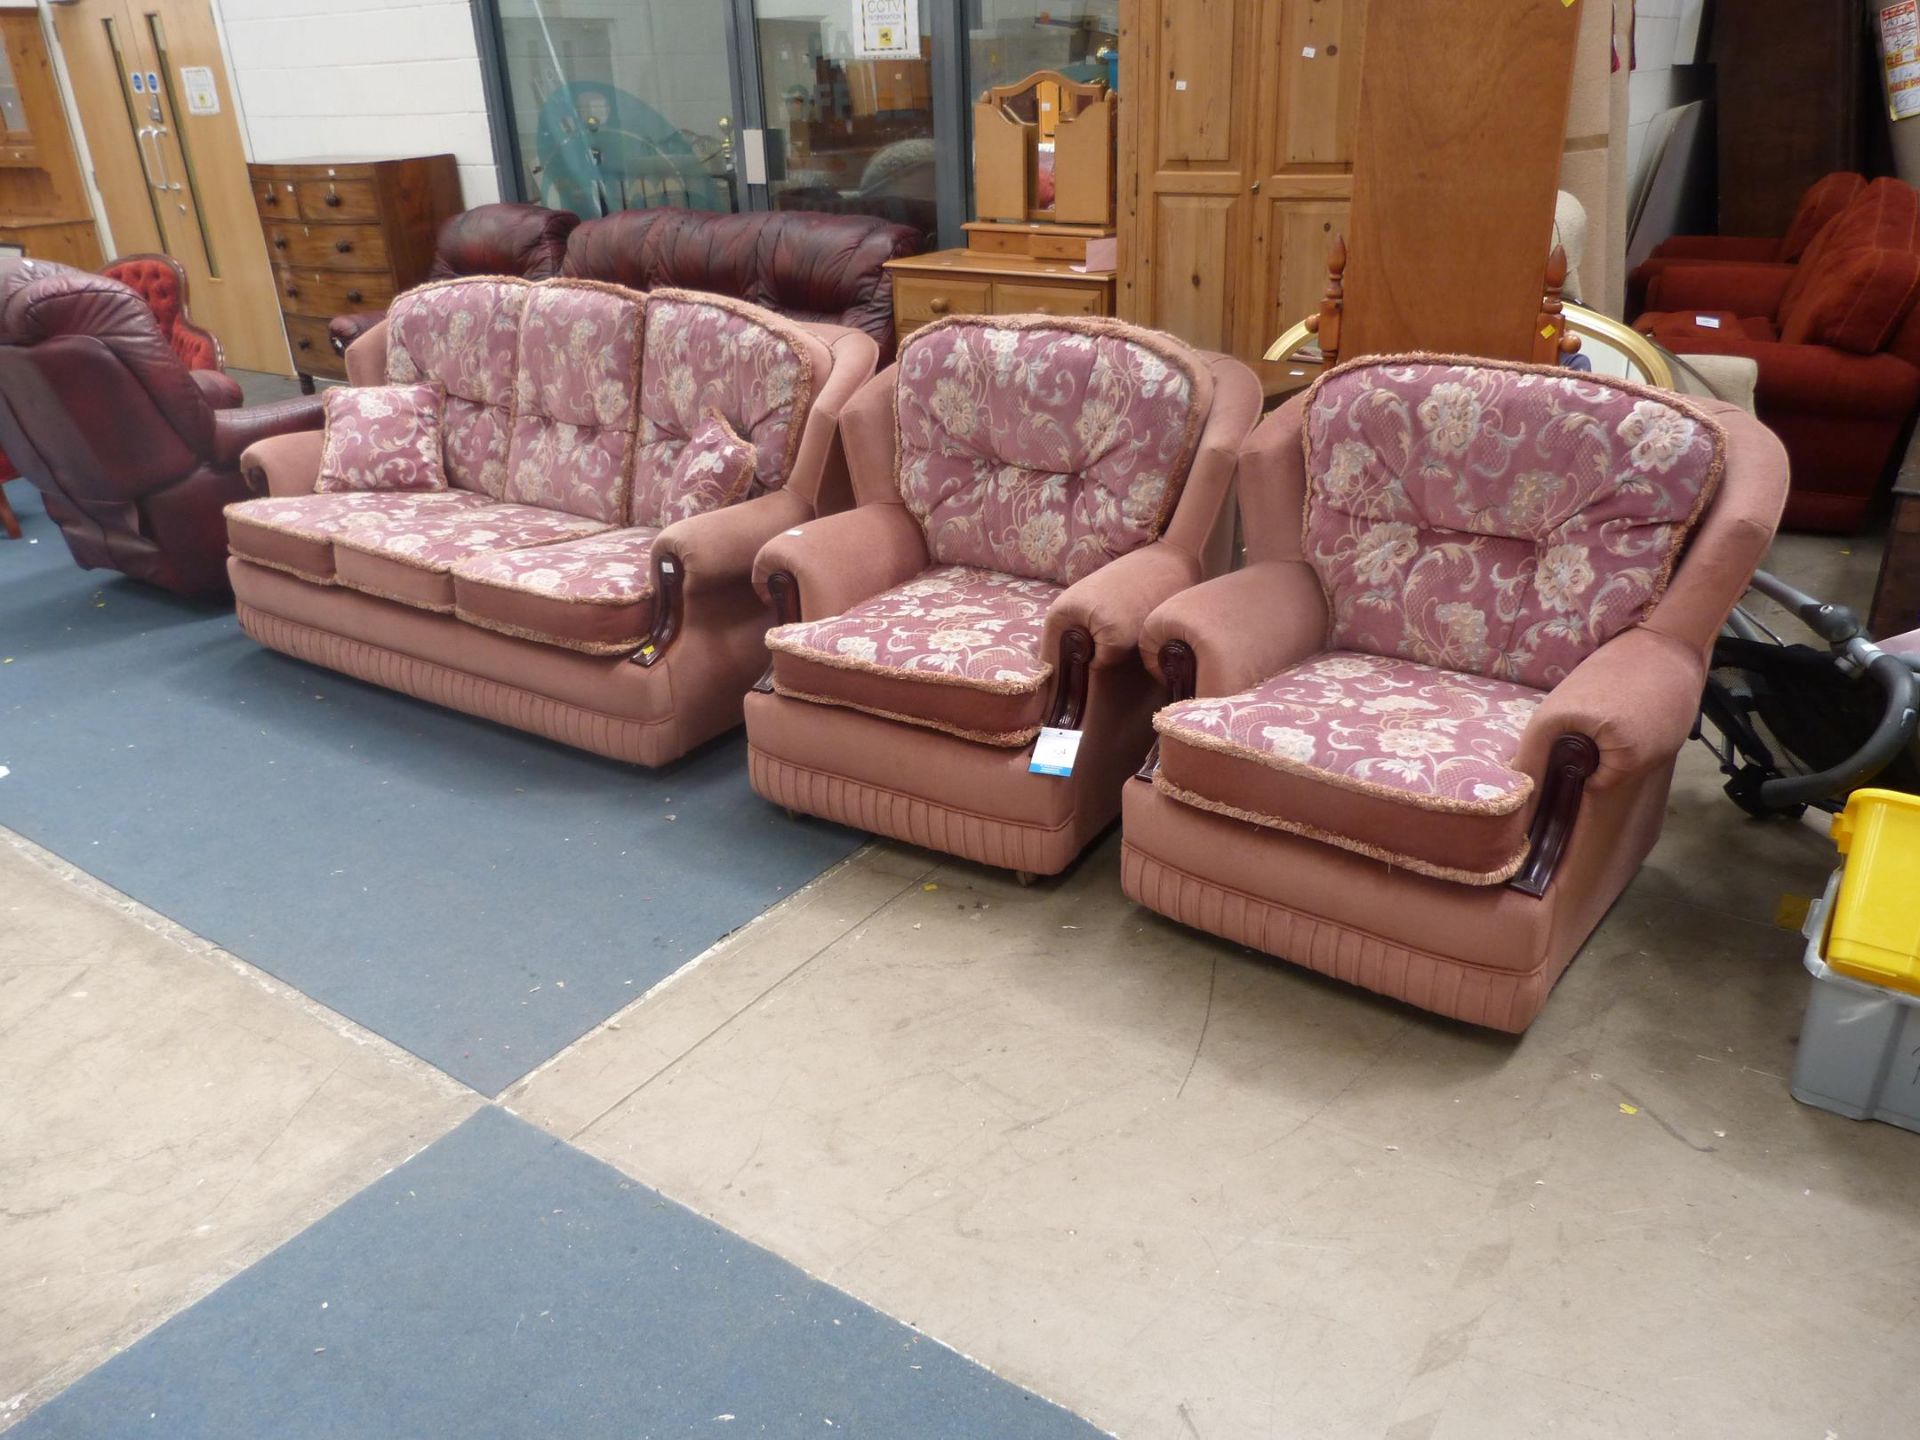 A Pink and Floral Pattern Velure Three Piece Lounge Suite (est £50-£80)